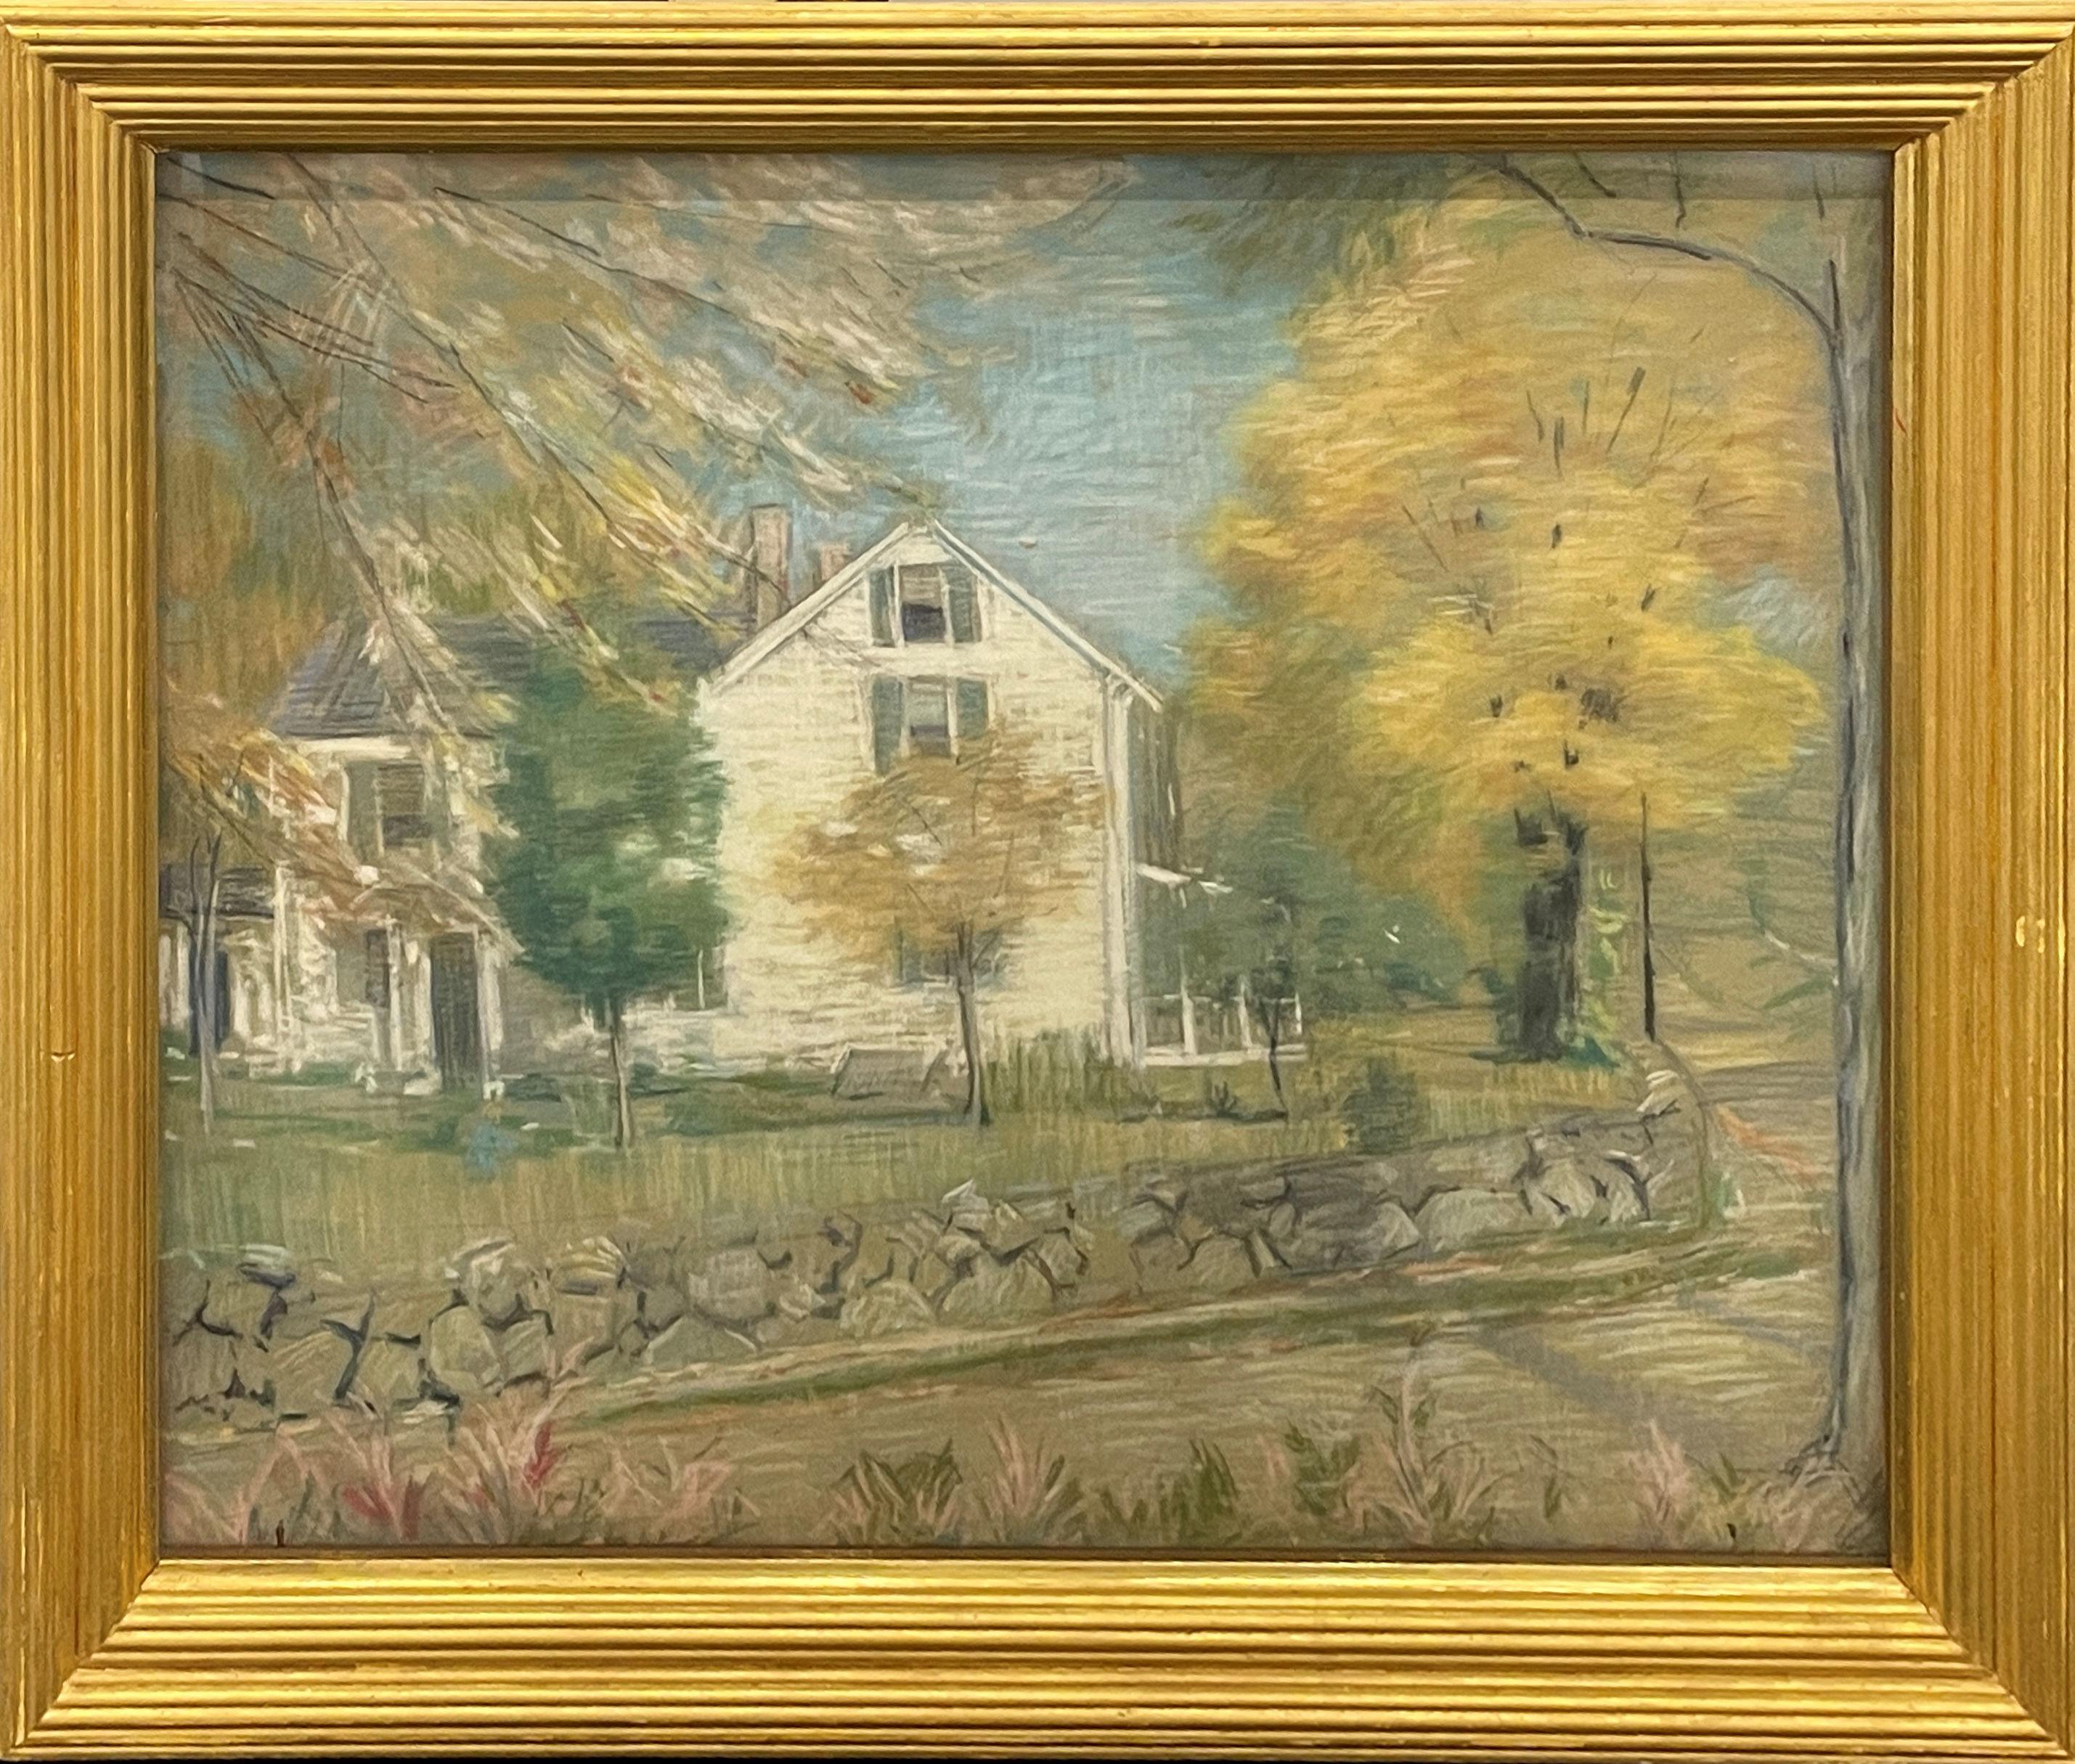 Philip Leslie Hale
New England Autumn, 1910
Pastel on canvas
25 x 30 inches

Provenance:
Estate of the artist
Sotheby's New York, American Paintings, Drawings and Sculpture, May 24, 1990, Lot 125
R. Anne McCarthy
Rose Art Museum, Waltham,